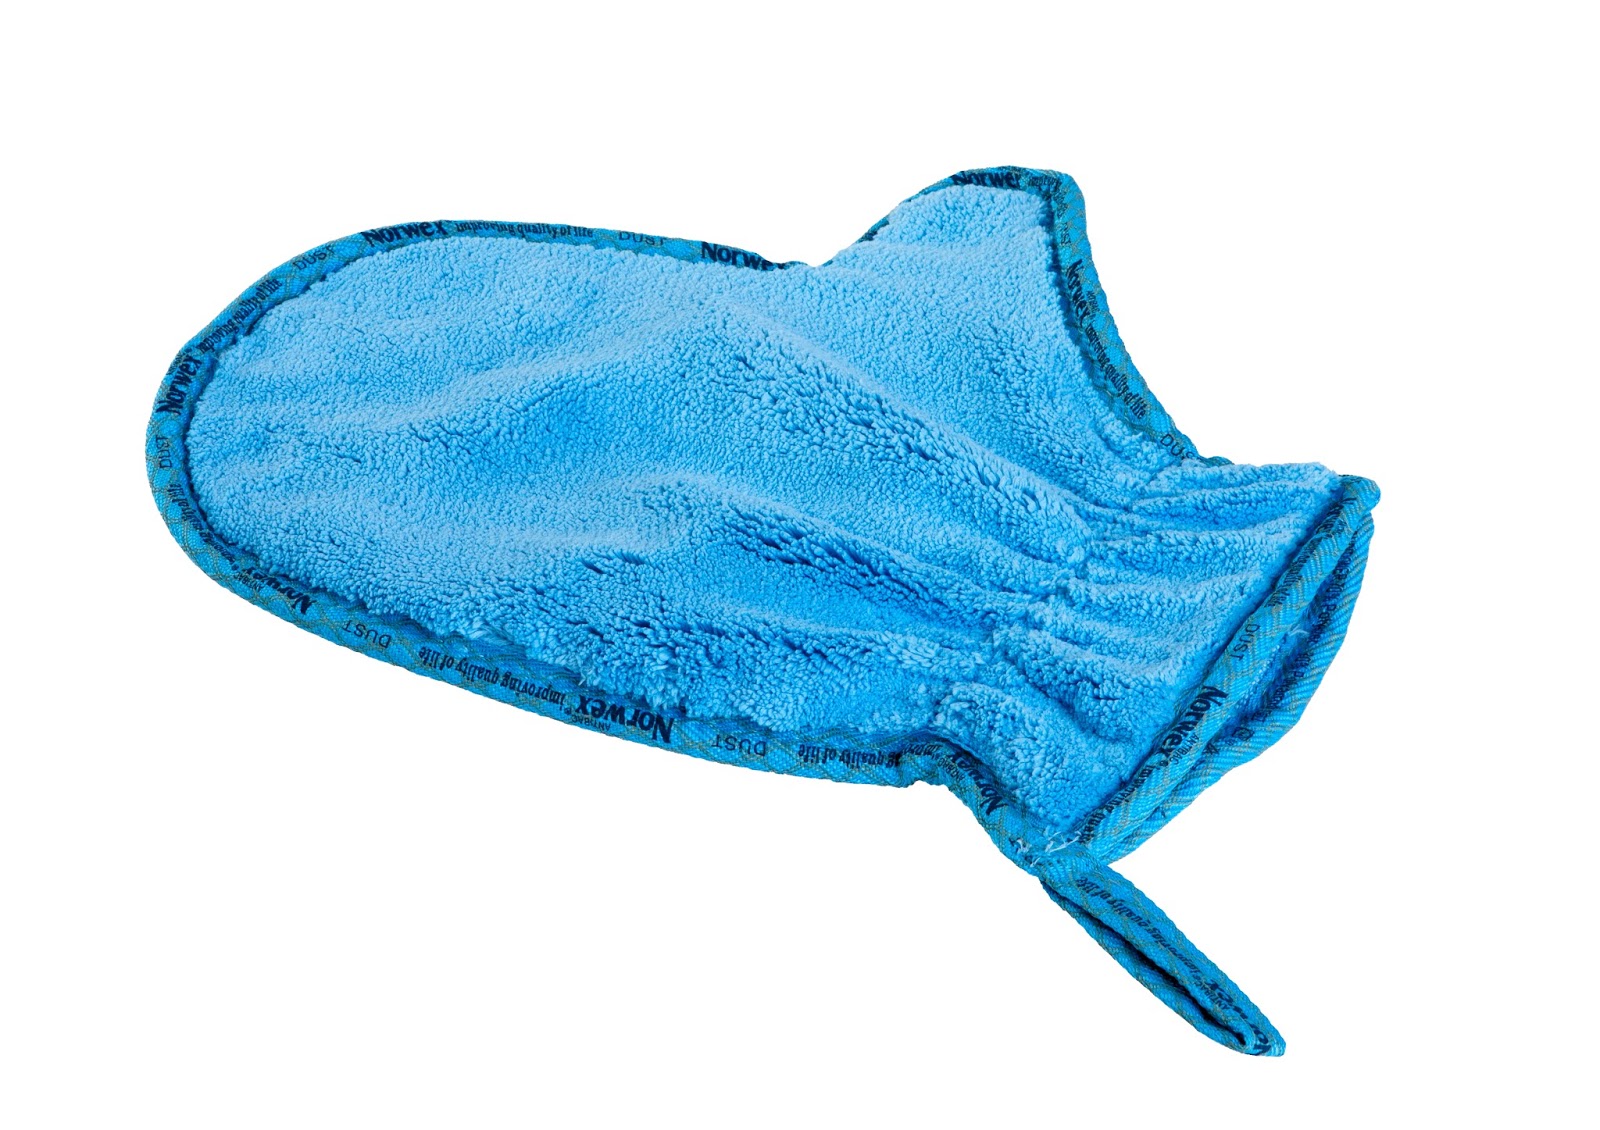 Norwex Dusting Mitt uses static electricity